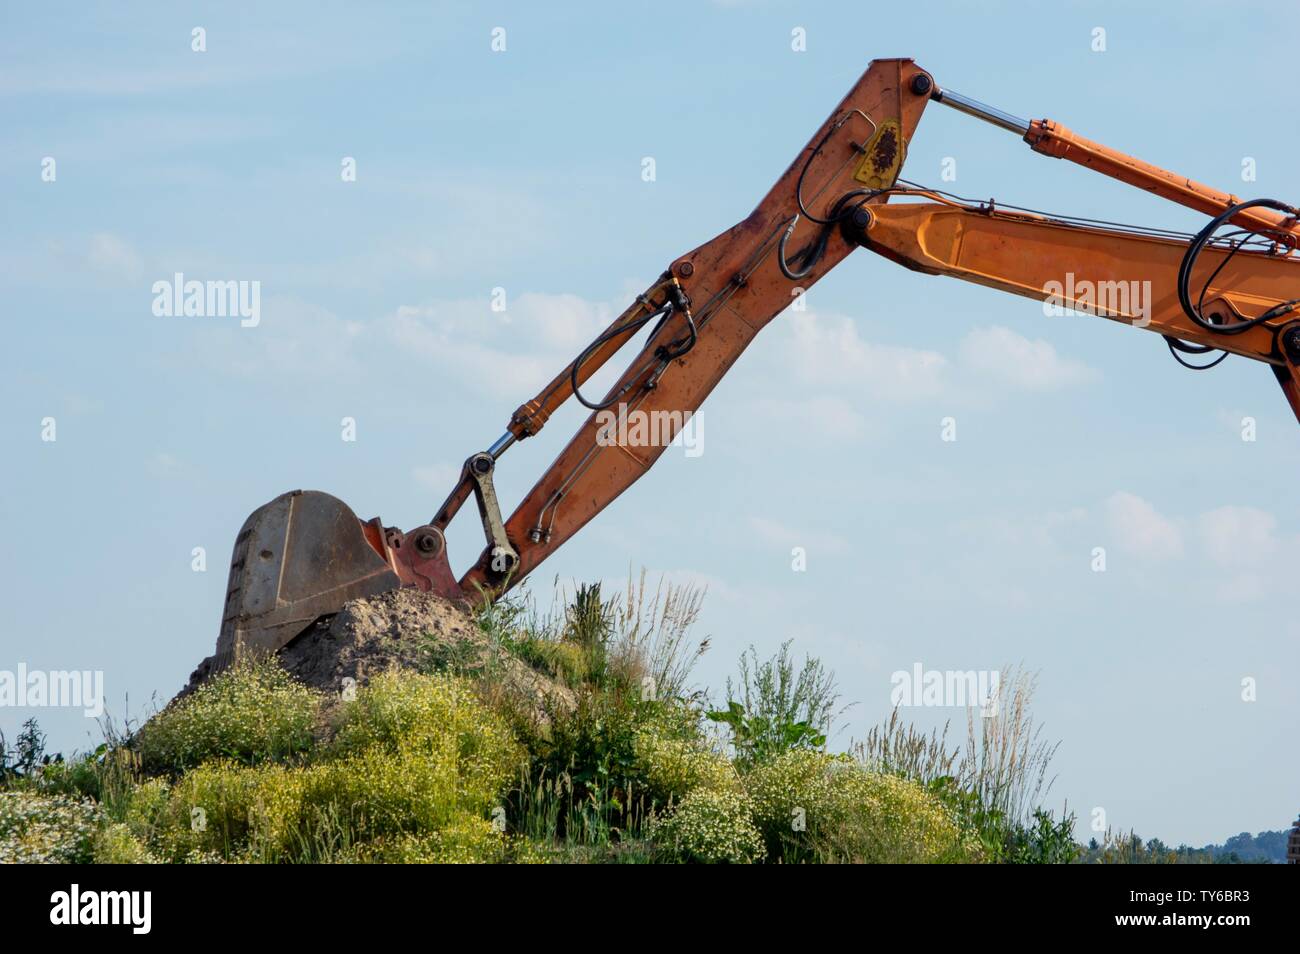 Excavator Arm against blue sky with clouds Stock Photo